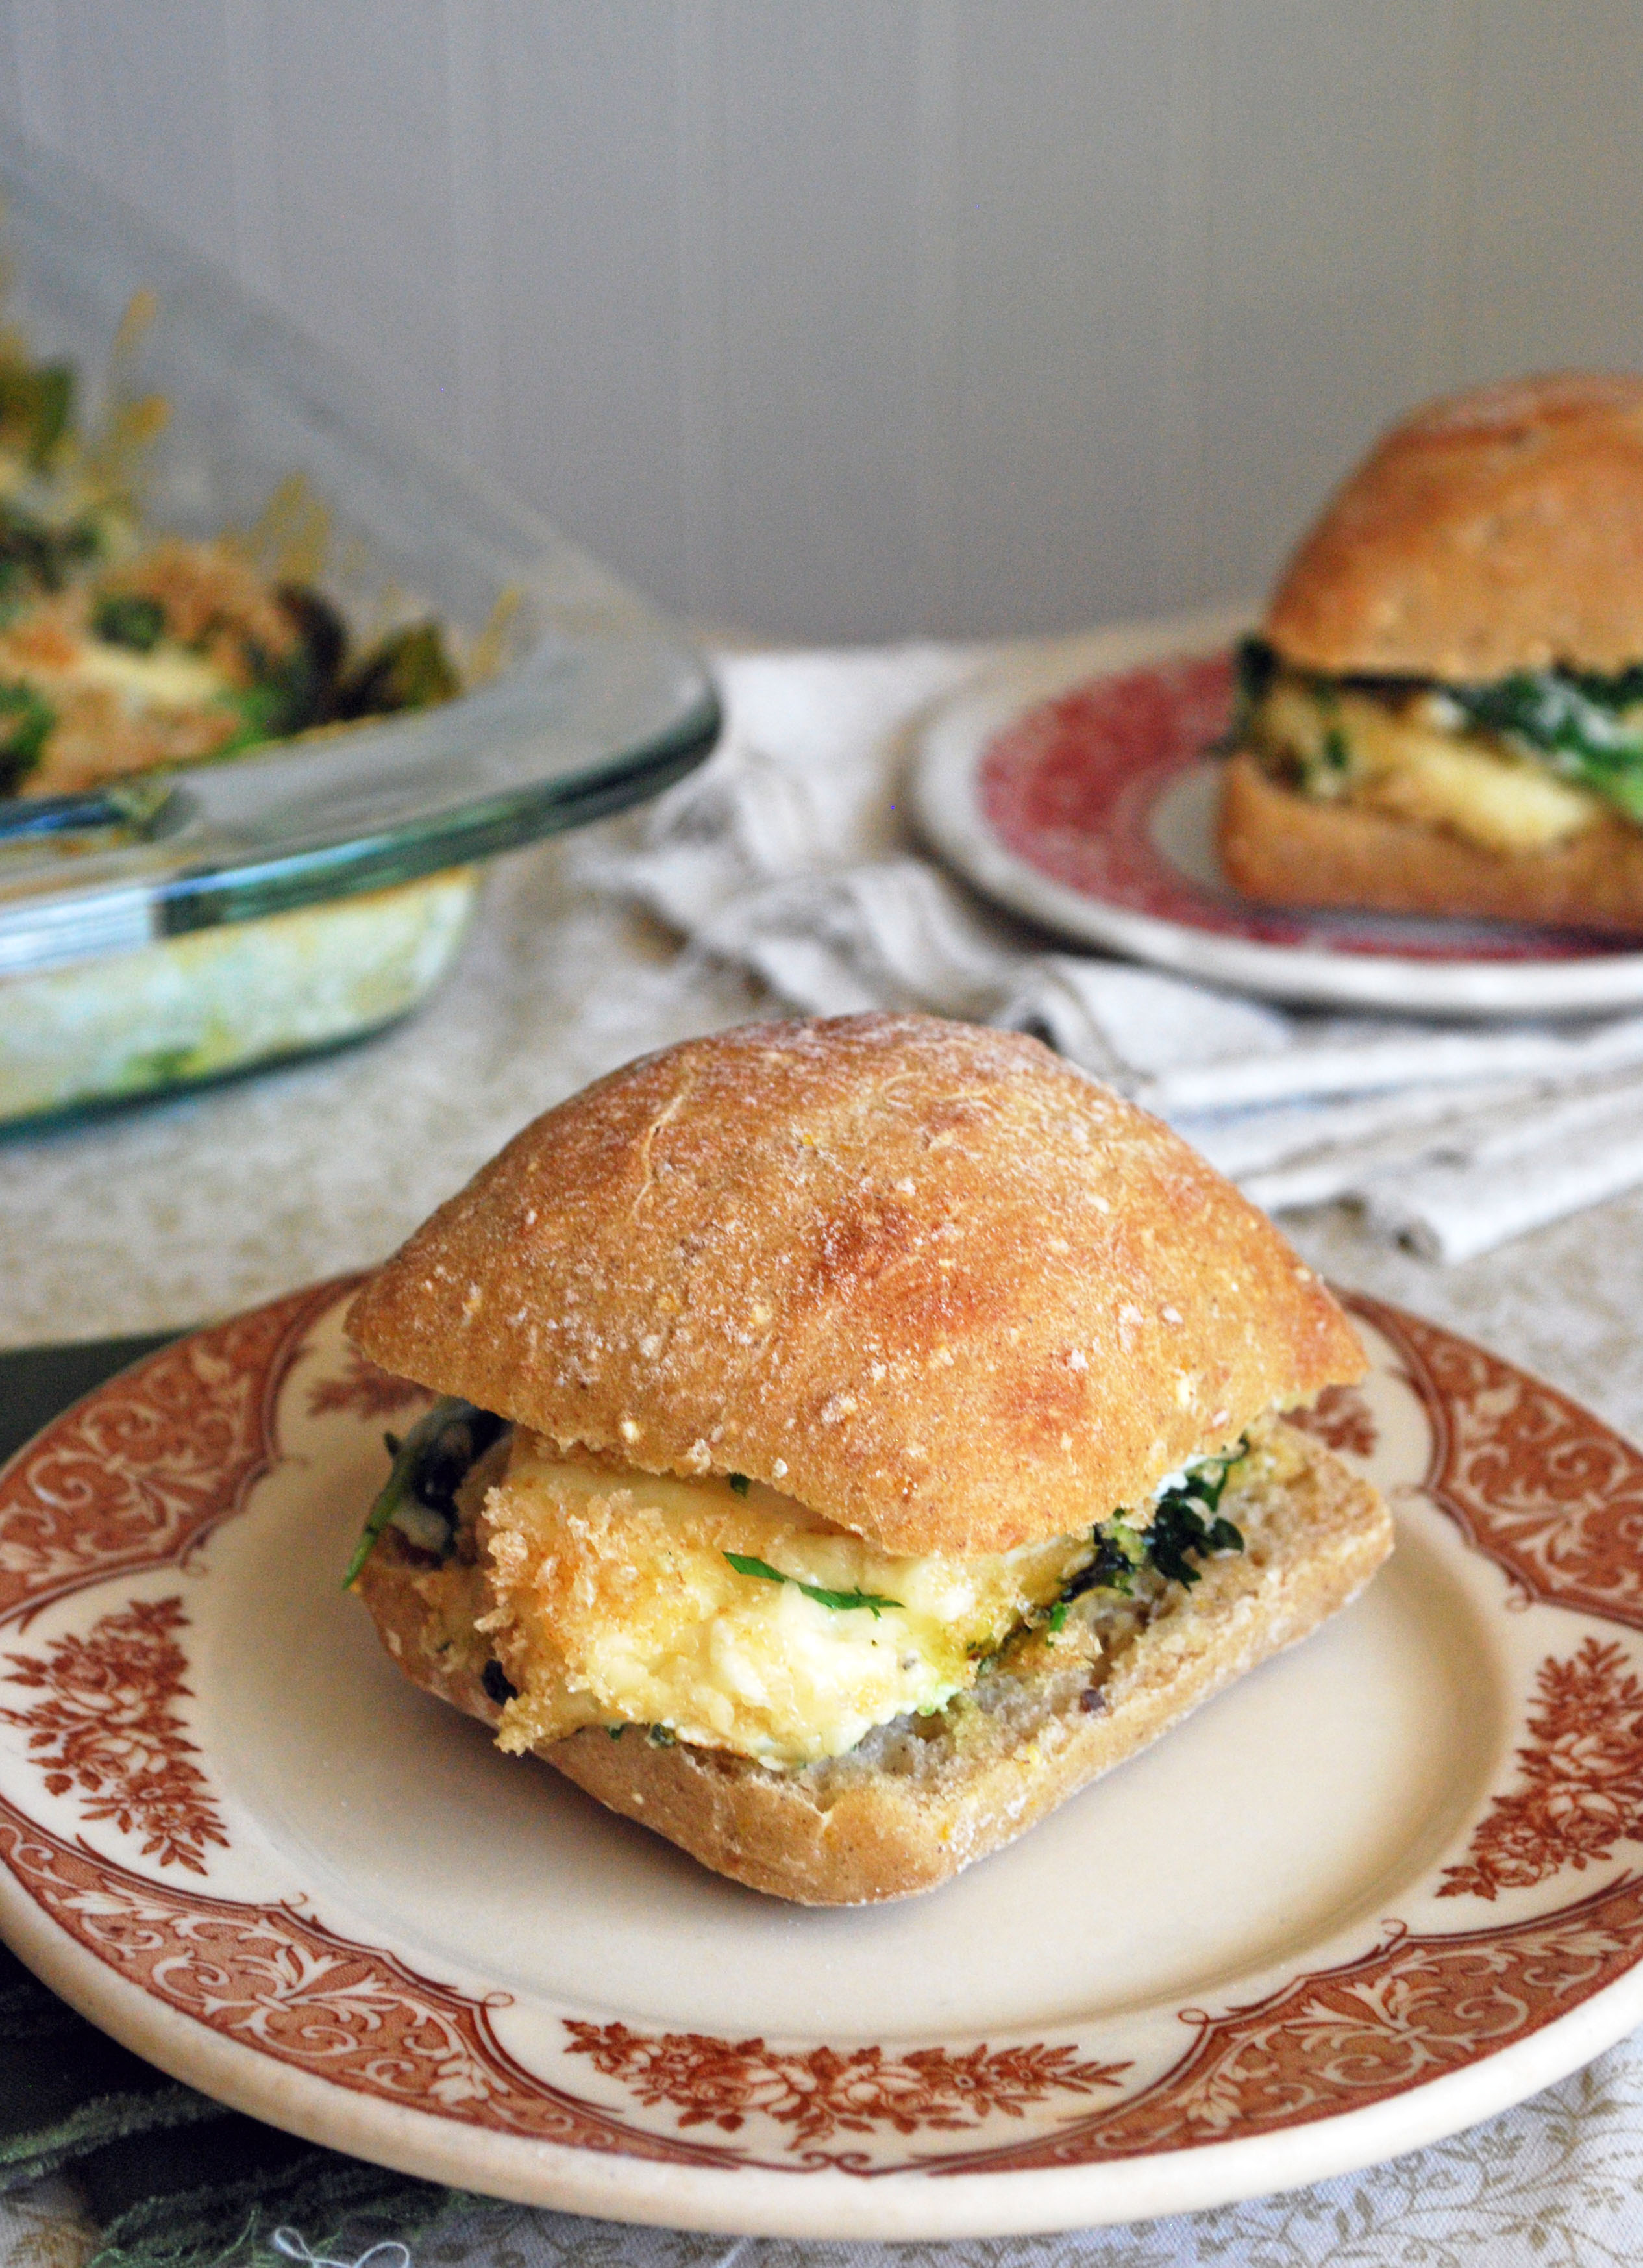 Cheesy Spinach Baked Egg Sandwiches - The Live-In Kitchen